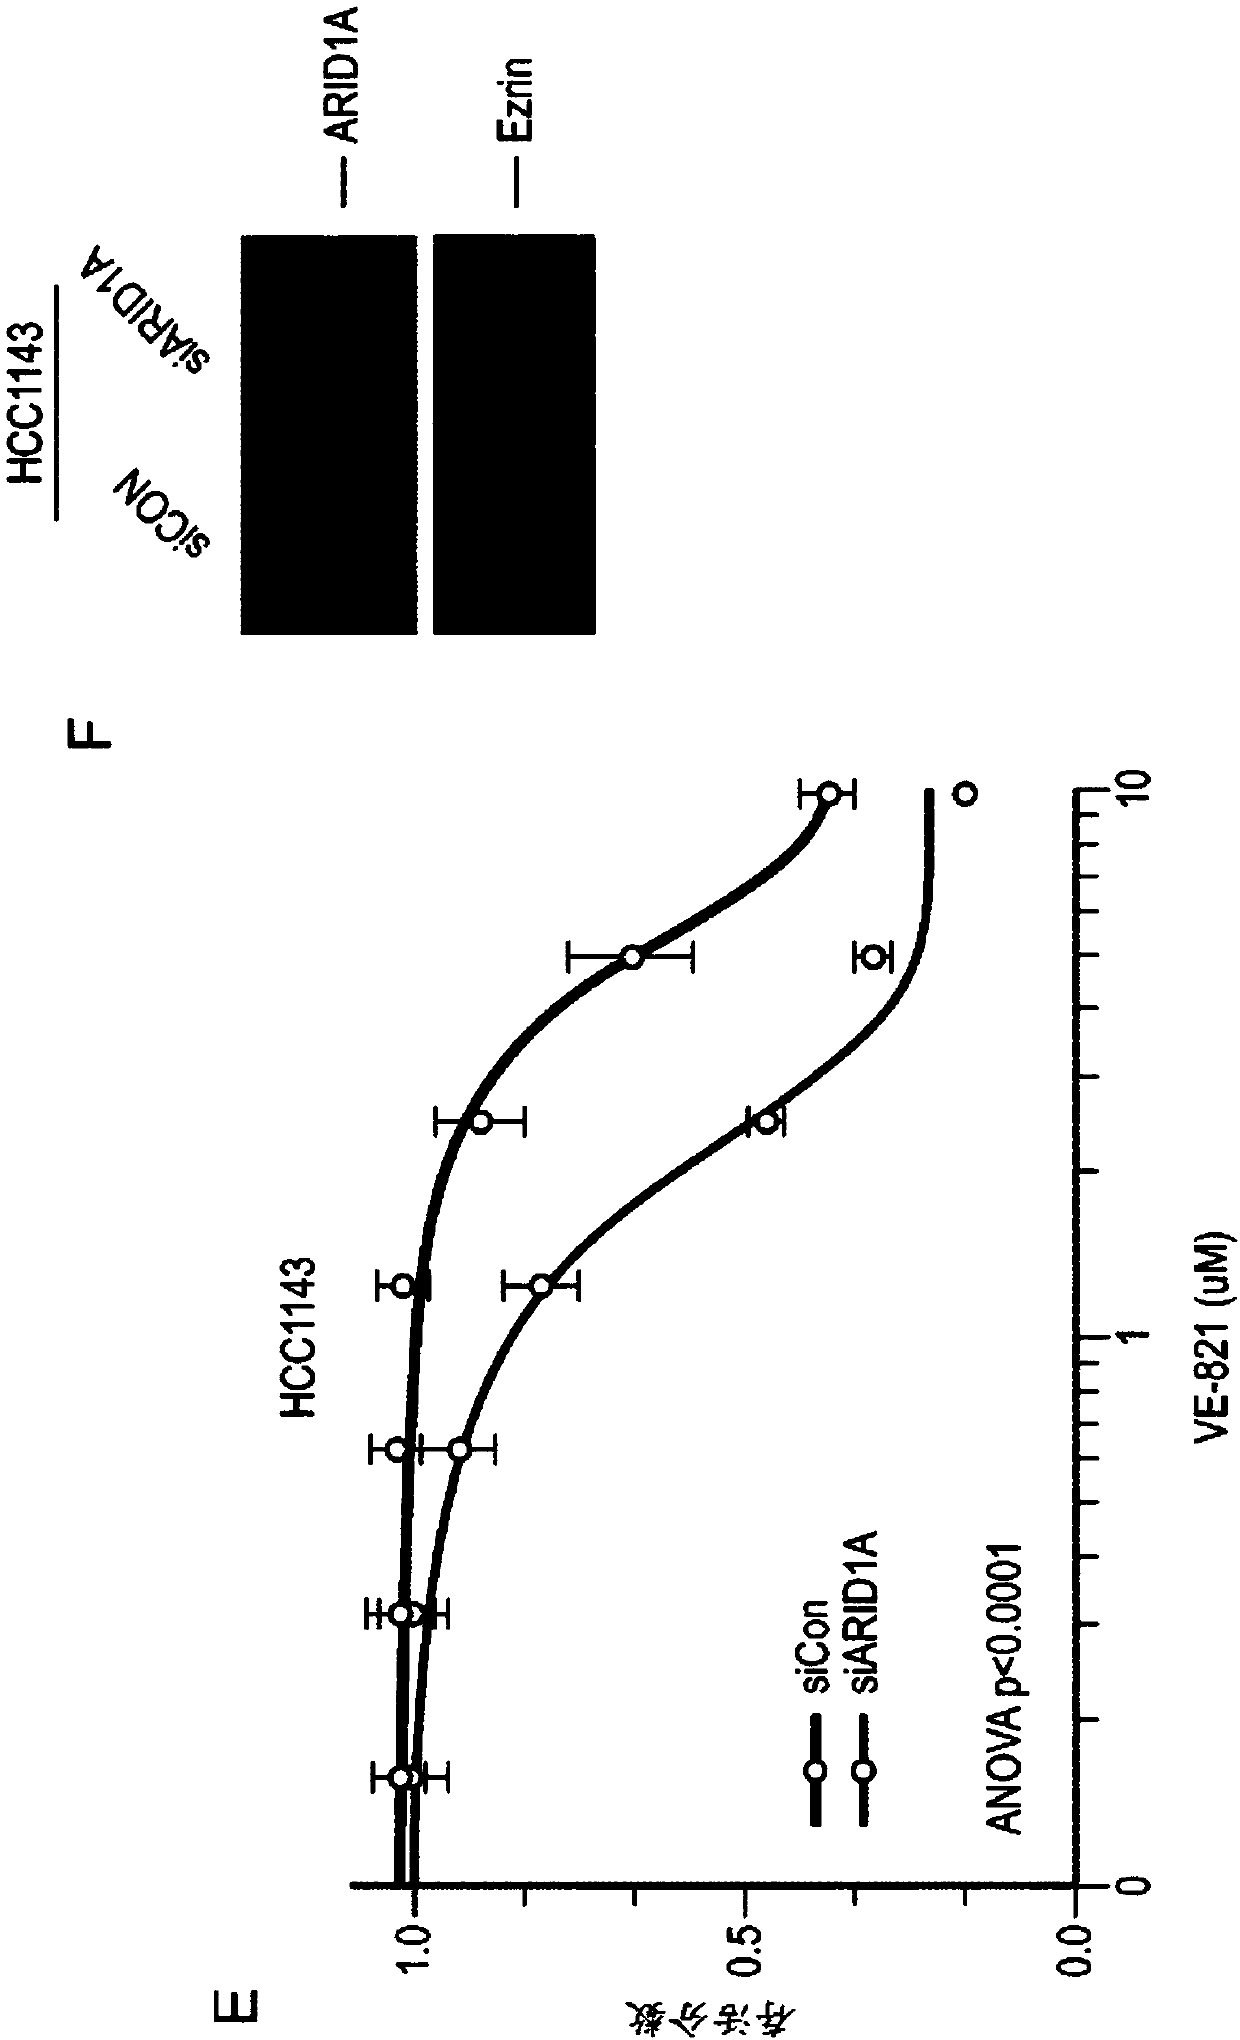 Inhibitors of ataxia-telangiectasia mutated and rad3-related protein kinase (ATR) for use in methods of treating cancer